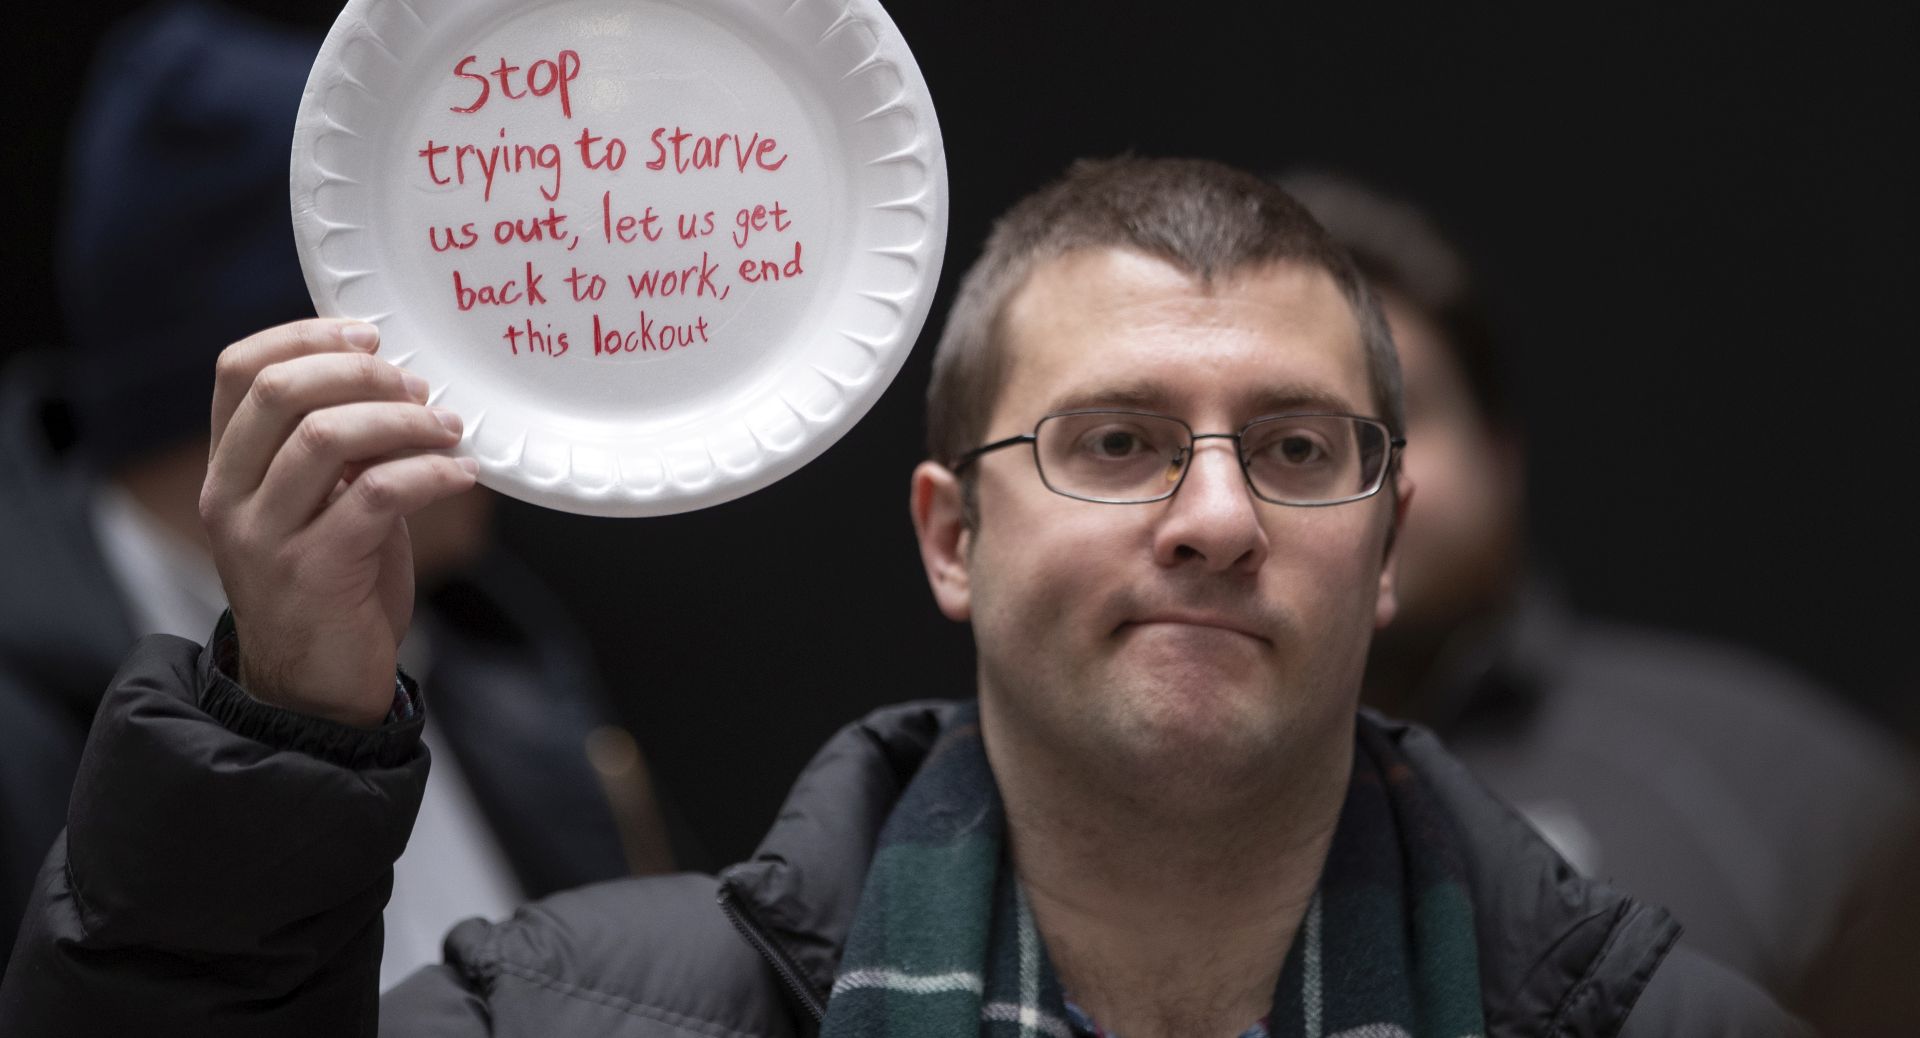 epa07312933 A man displays his thoughts, written out on a disposable plate, during the 'Occupy Hart' protest against the partial government shutdown sponsored by American Federation of Government Employees at the Hart Senate Office Building at the US Capitol in Washington, DC, USA, 23 January 2019. Federal workers and their supporters stood silently for 33 minutes for the 33 days of the shutdown.  EPA/ERIK S. LESSER